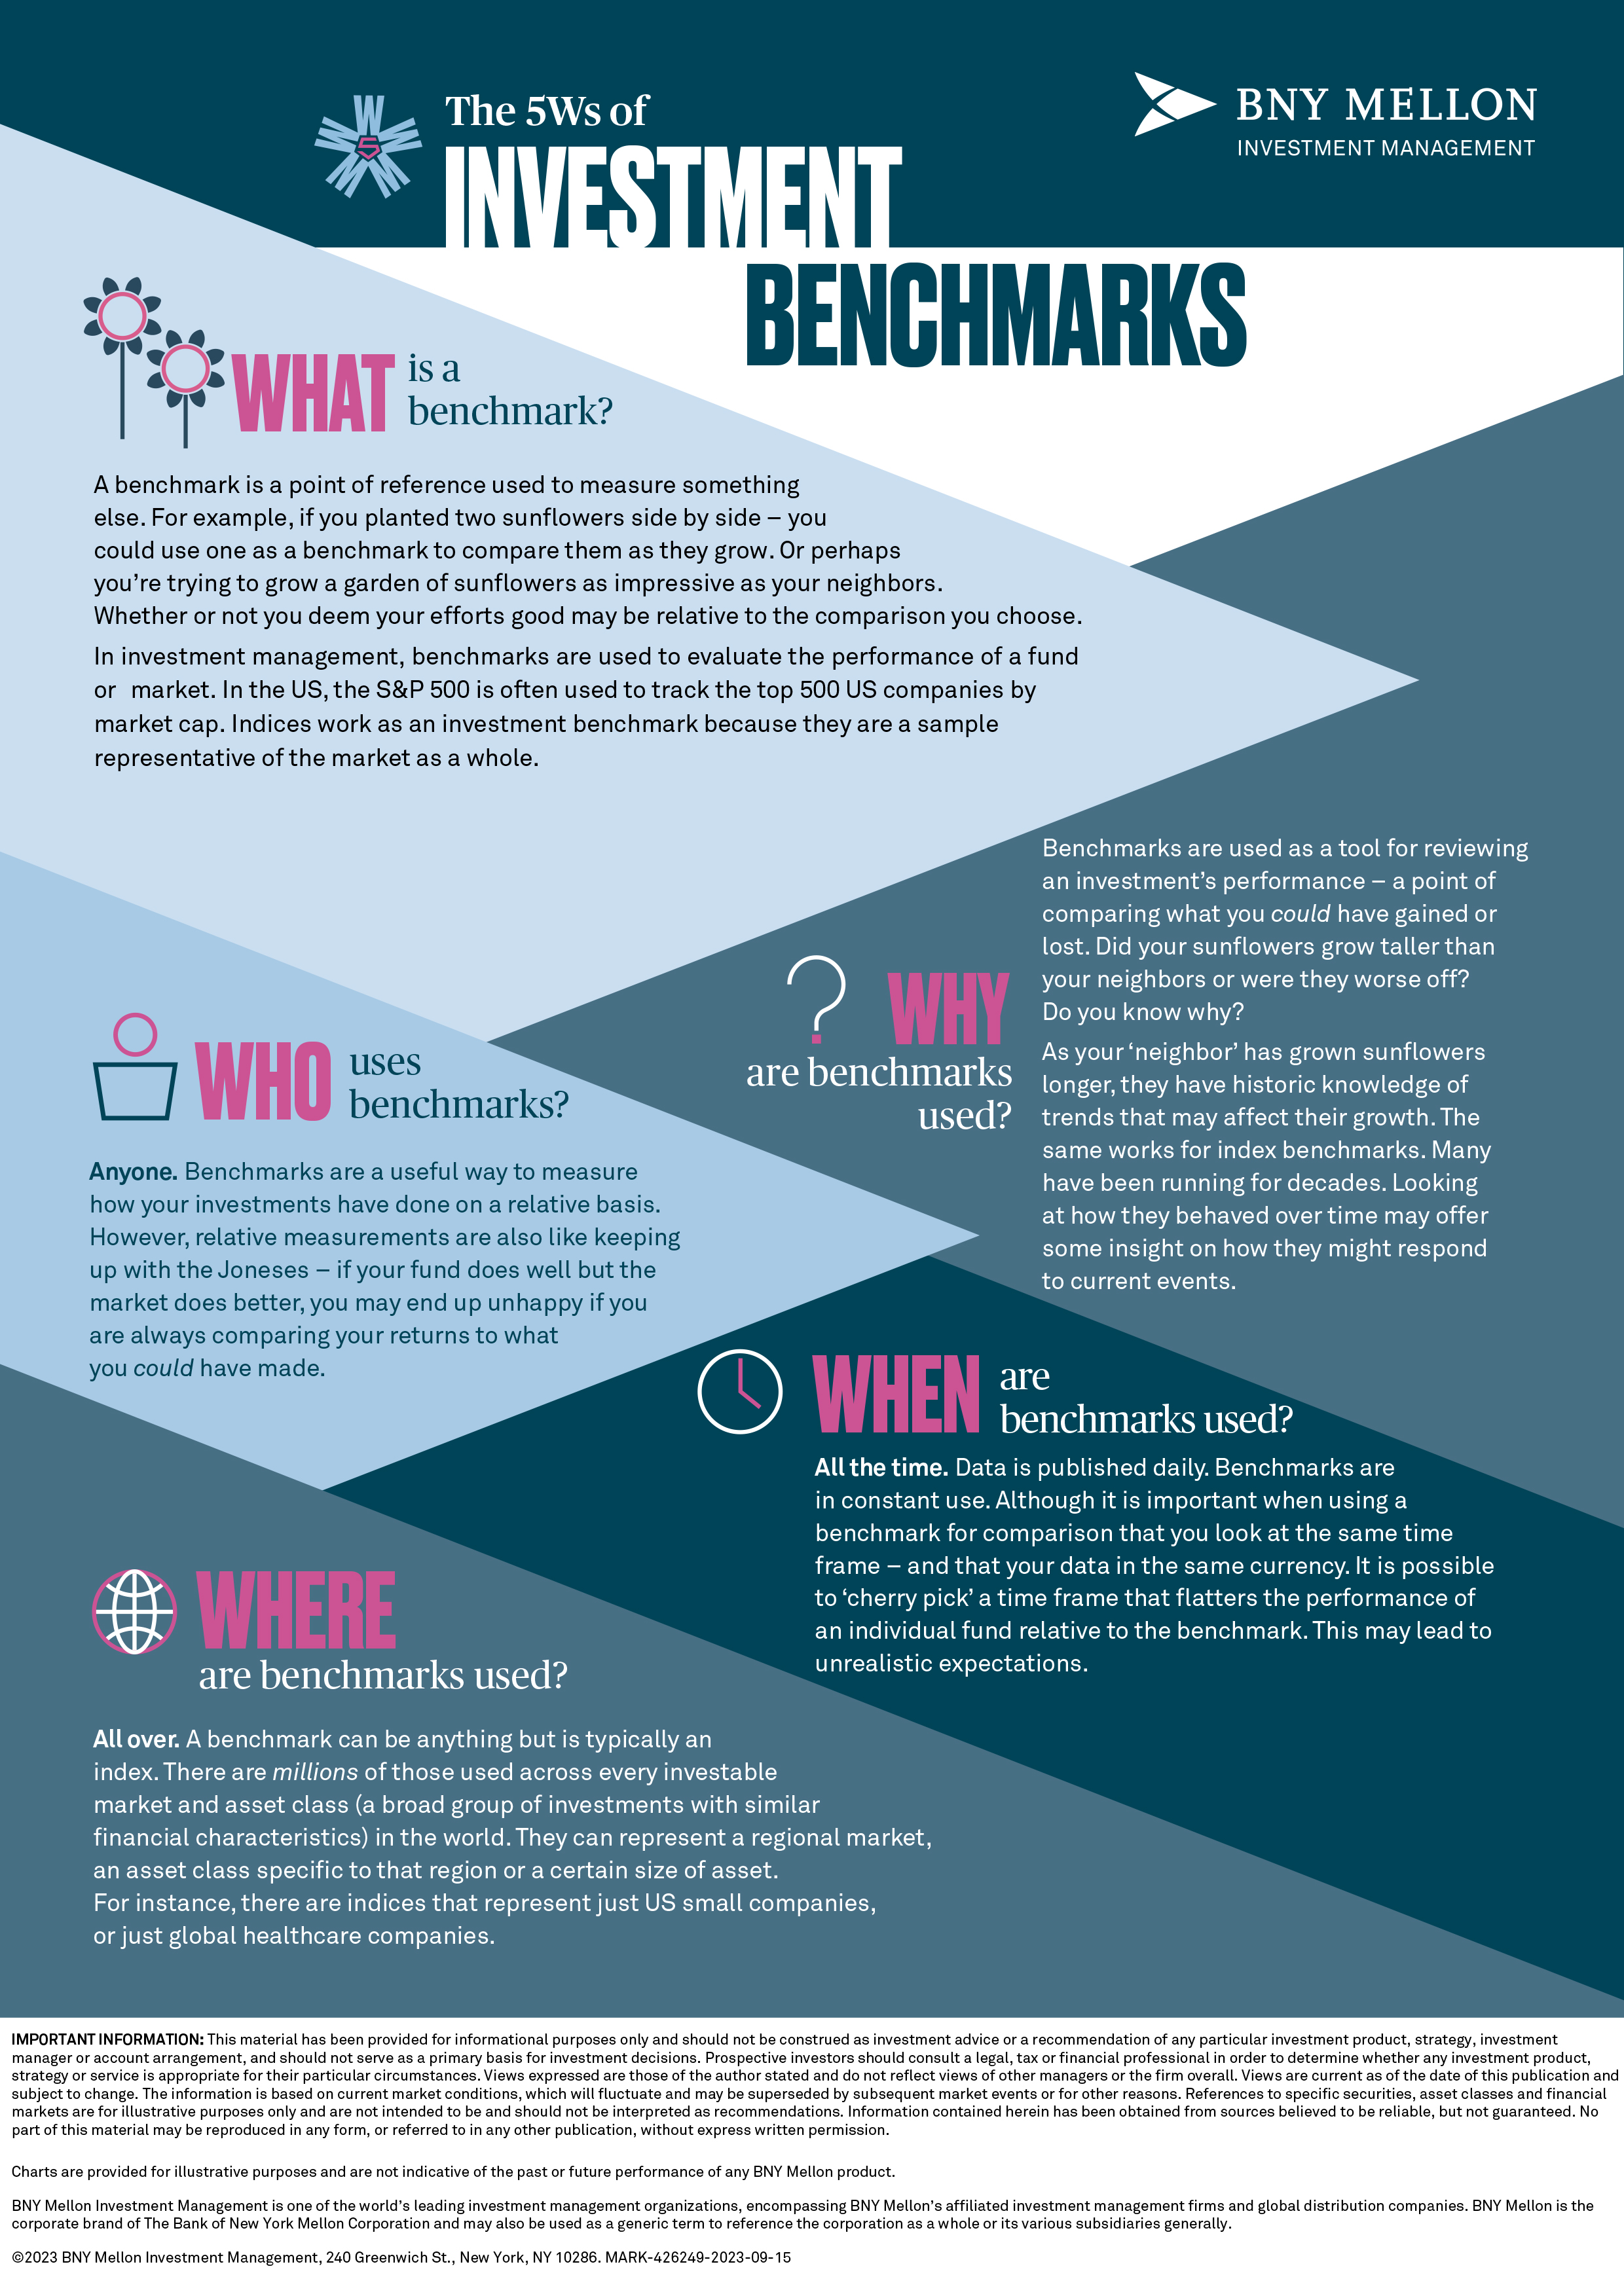 Infographic defining what is an investment benchmark